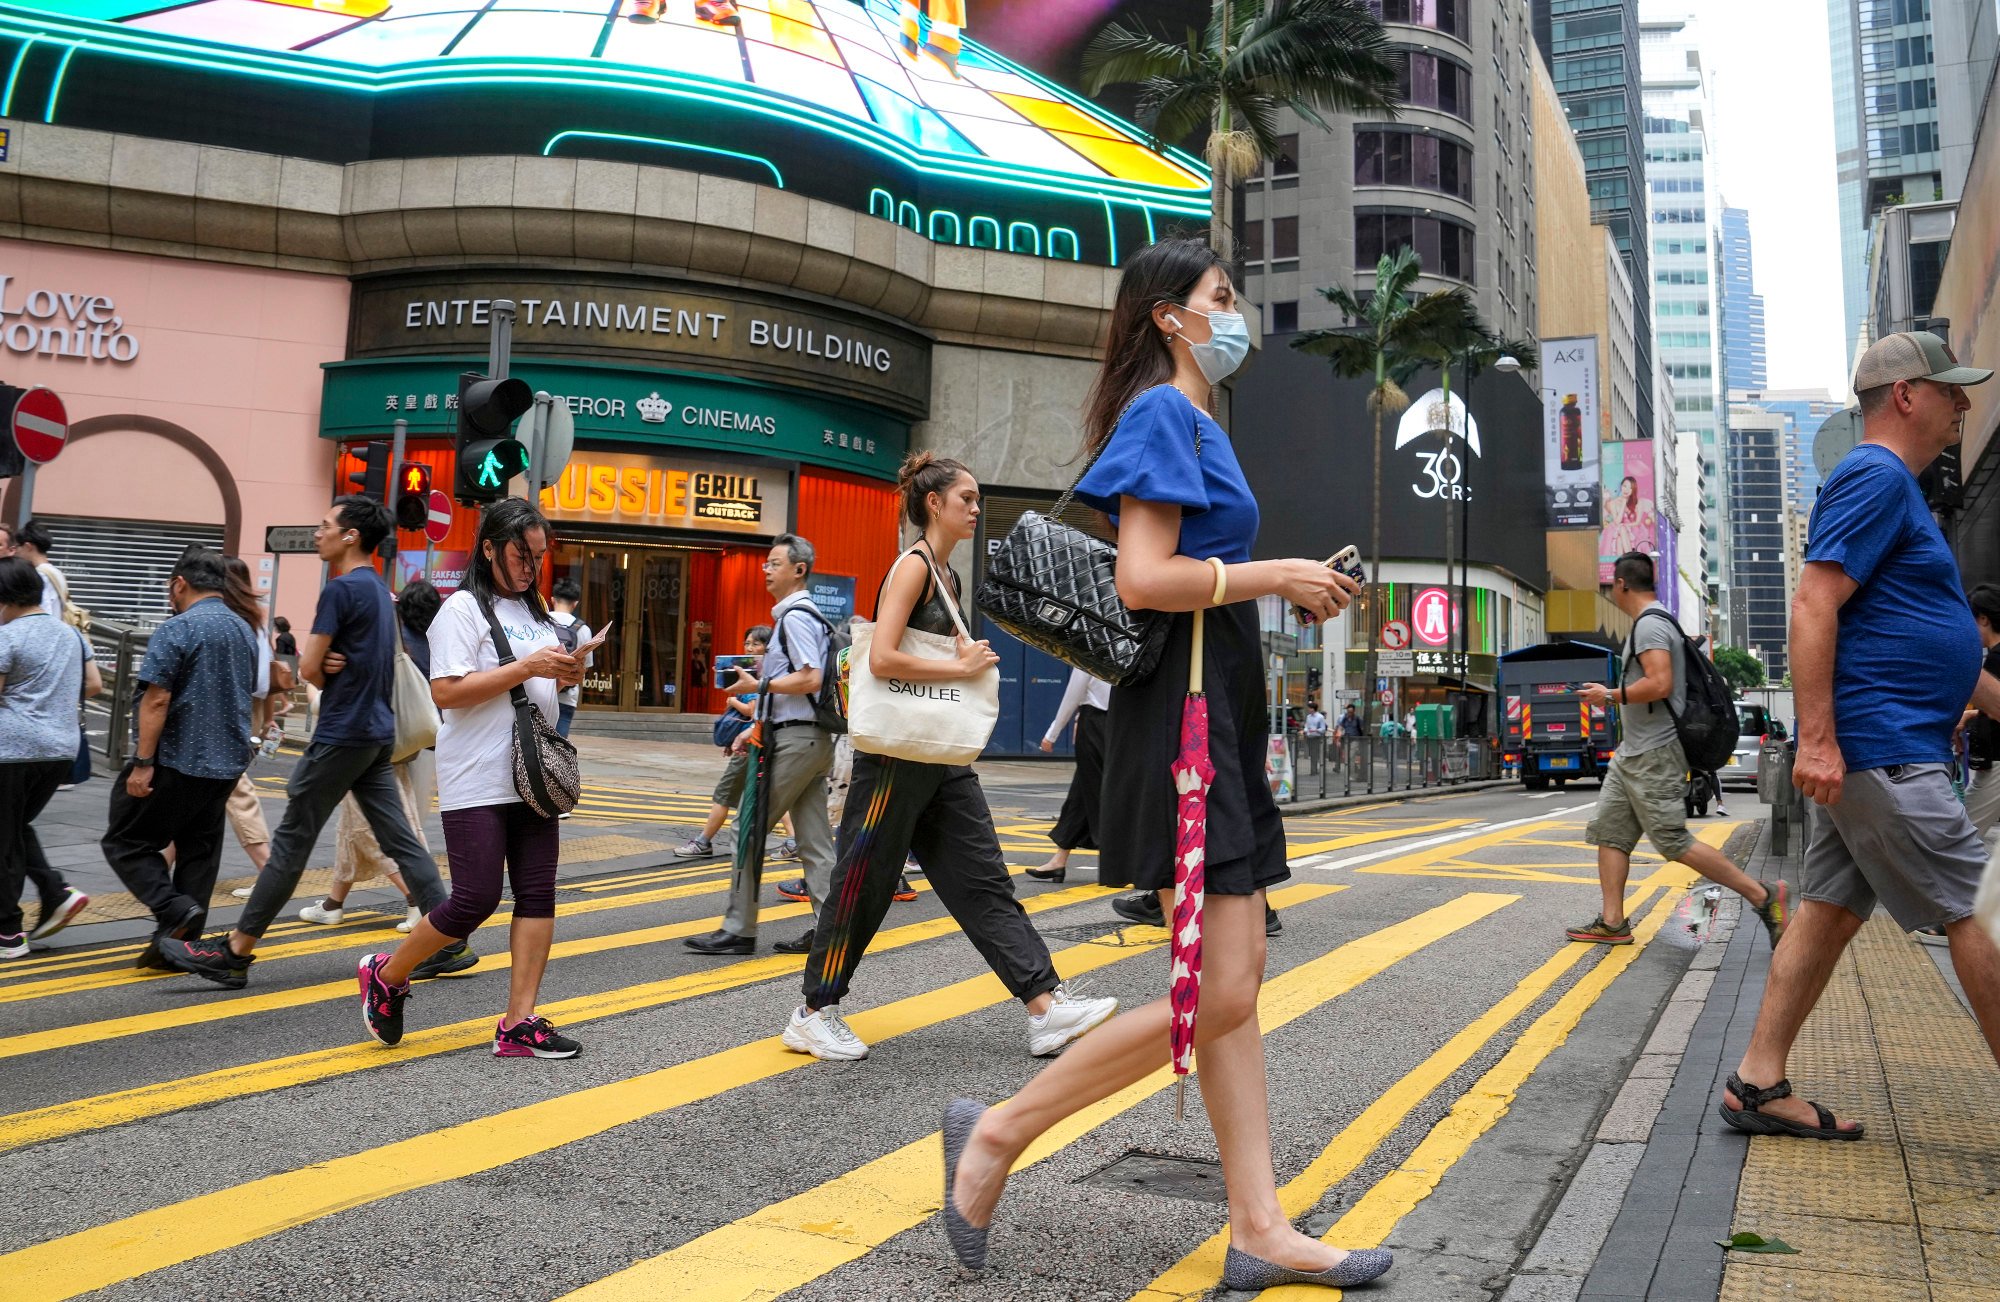 A labour shortfall across Hong Kong’s industries is thought to be behind employers’ willingness to budget more for talent. Photo: Elson Li